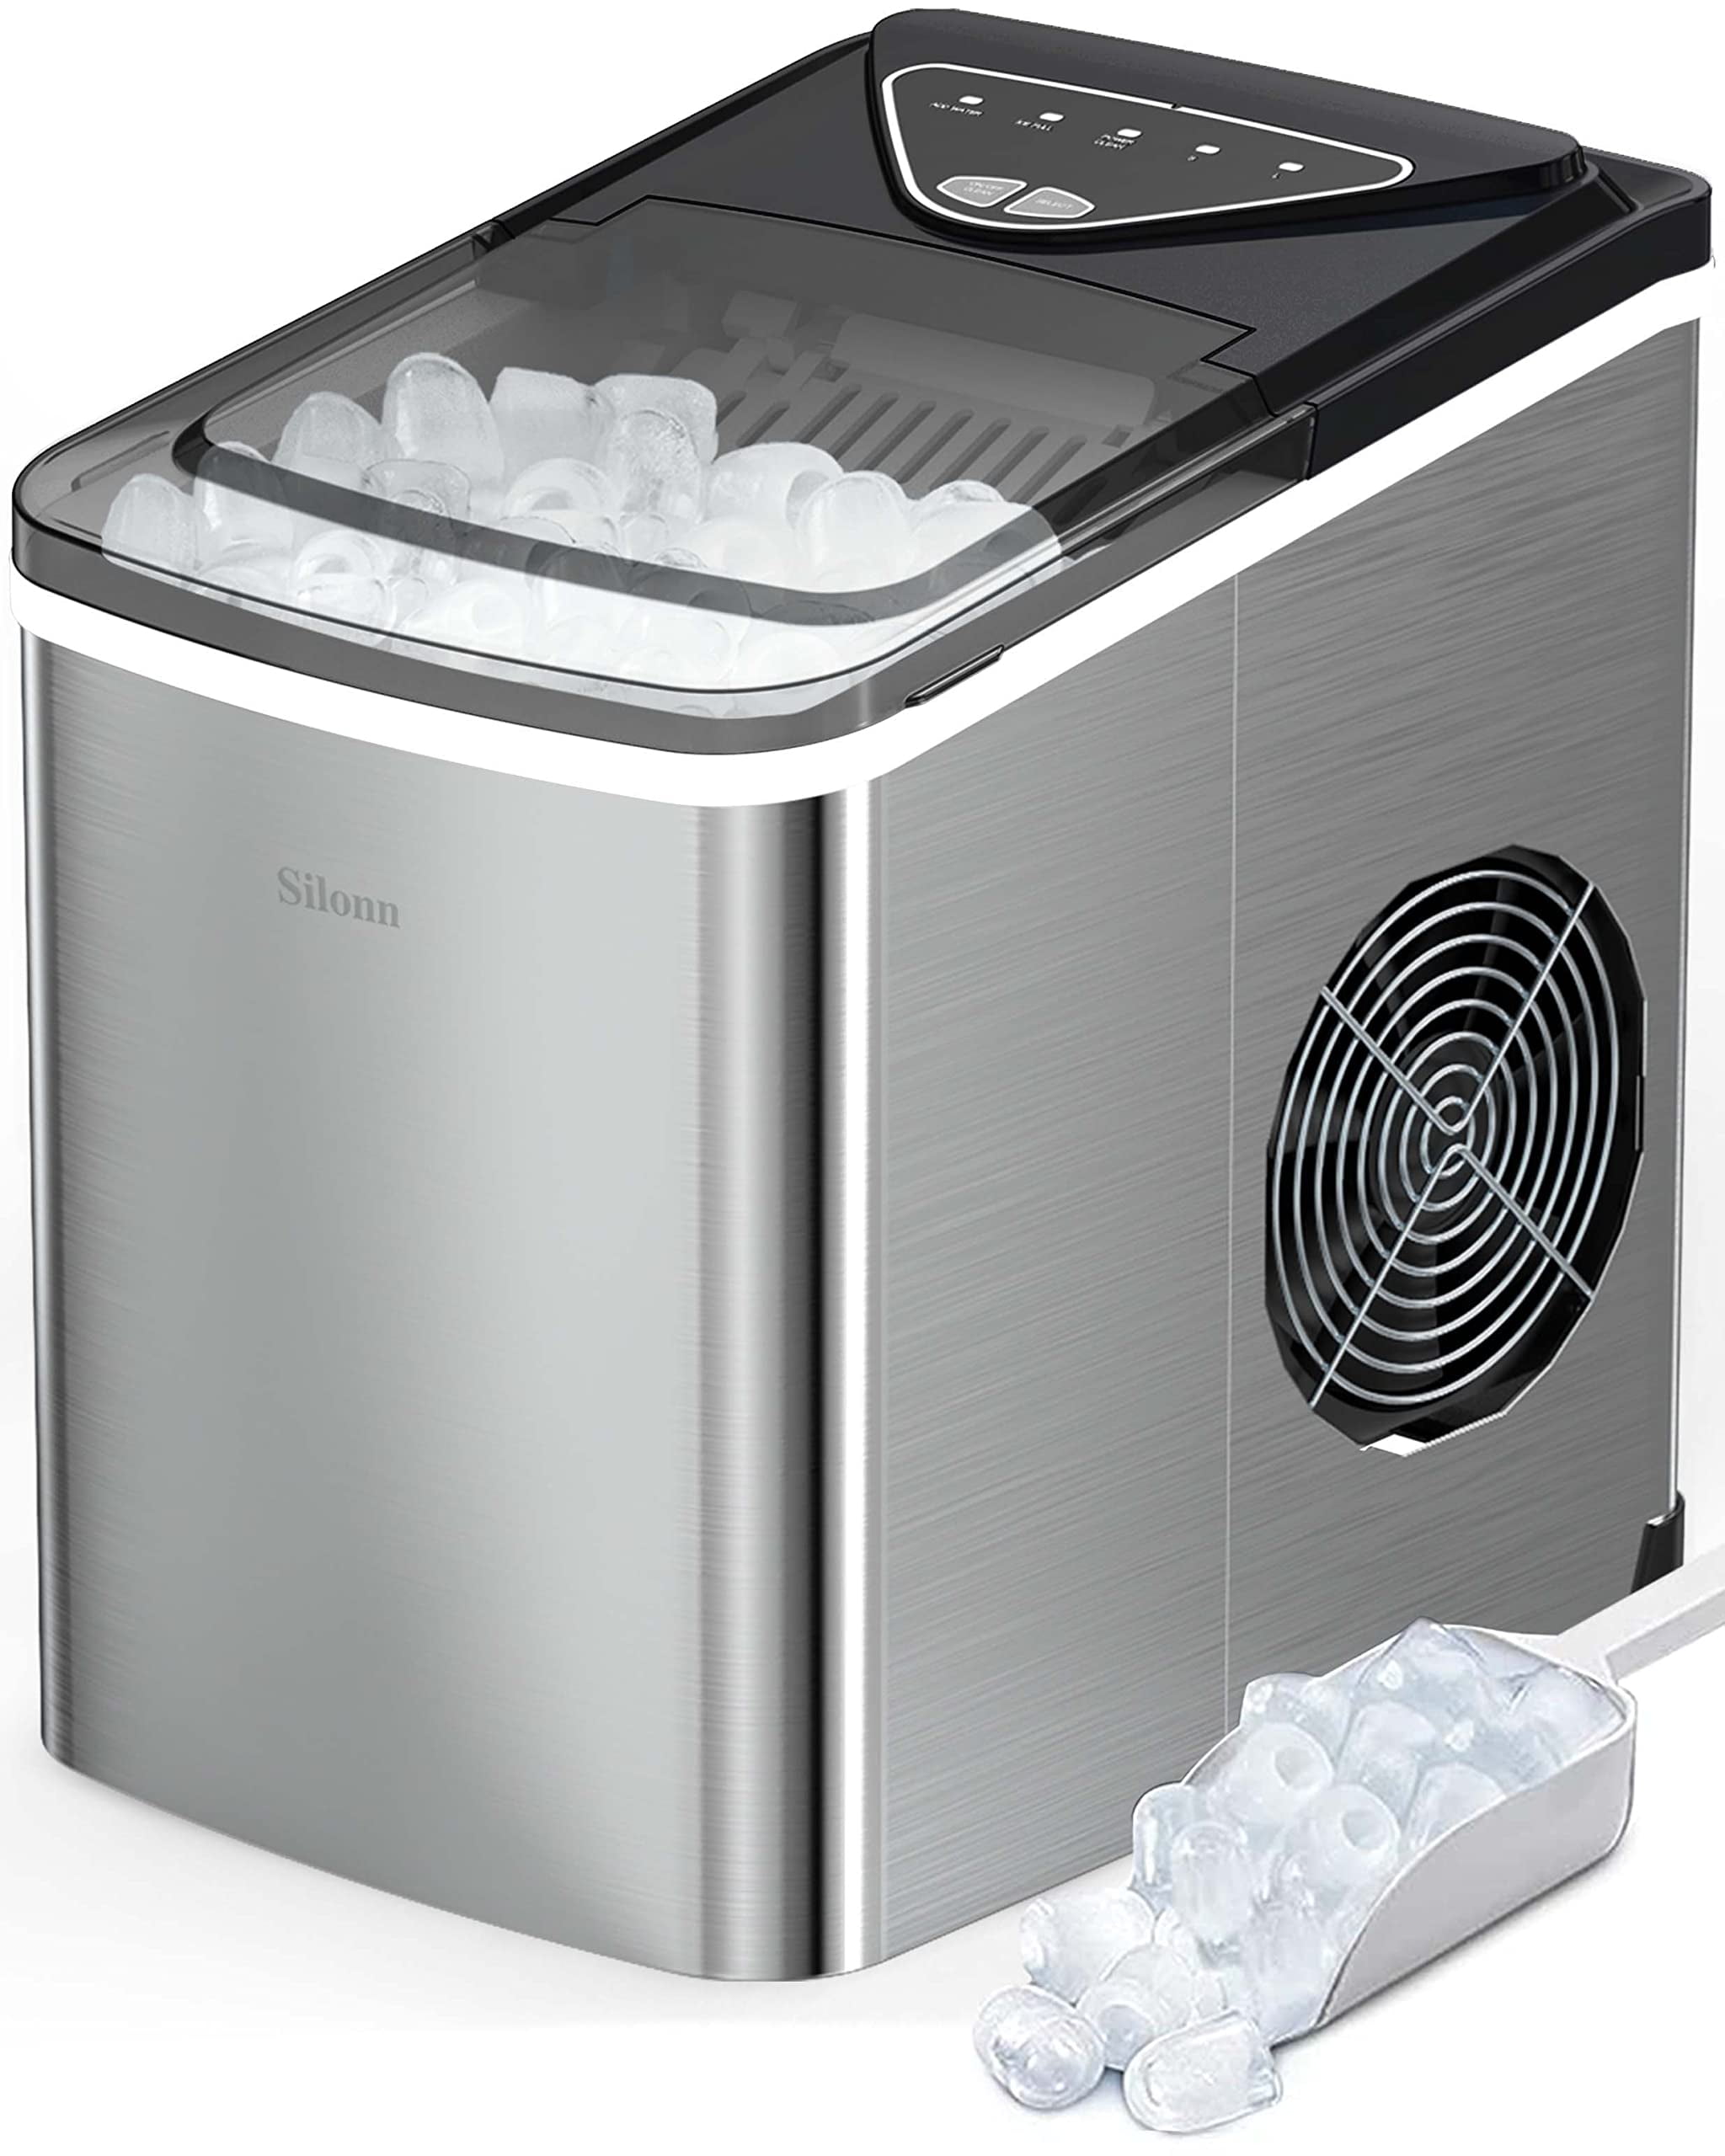 Silonn Countertop Ice Maker - 9 Cubes Ready in 6 Mins, 26lbs in 24Hrs,  Portable Ice Machine with Self-Cleaning, 2 Sizes of Bullet Ice for  Home/Kitchen/Party/RV, Black